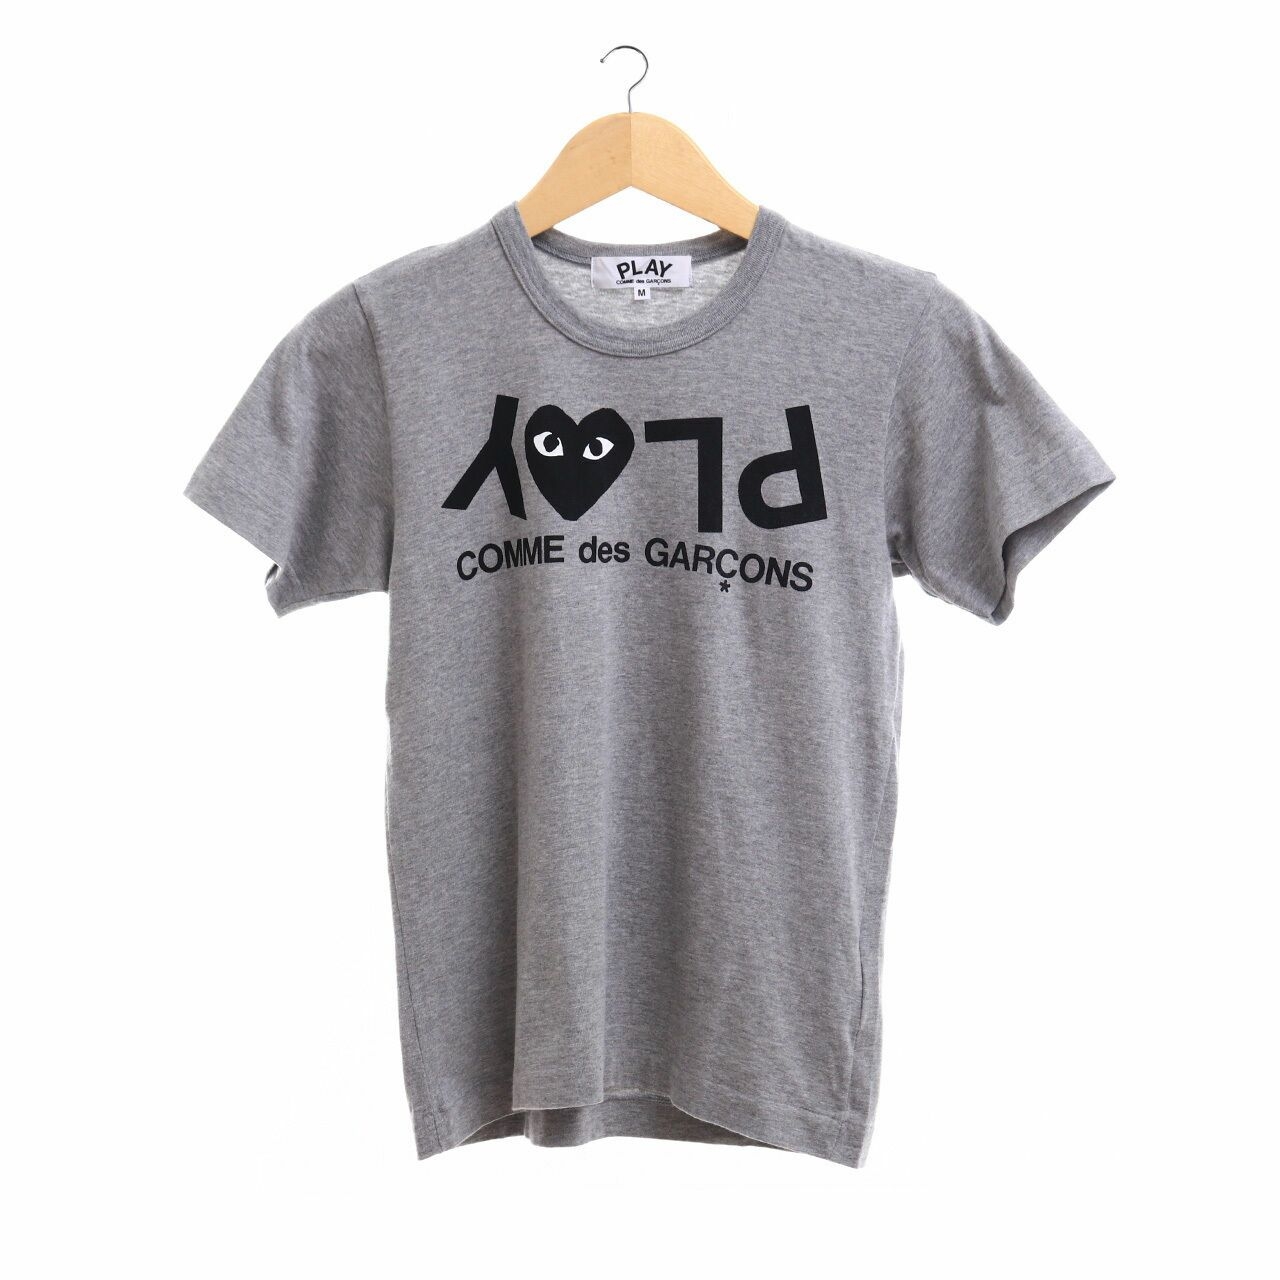 Play by Comme des Garcons Grey T-Shirt